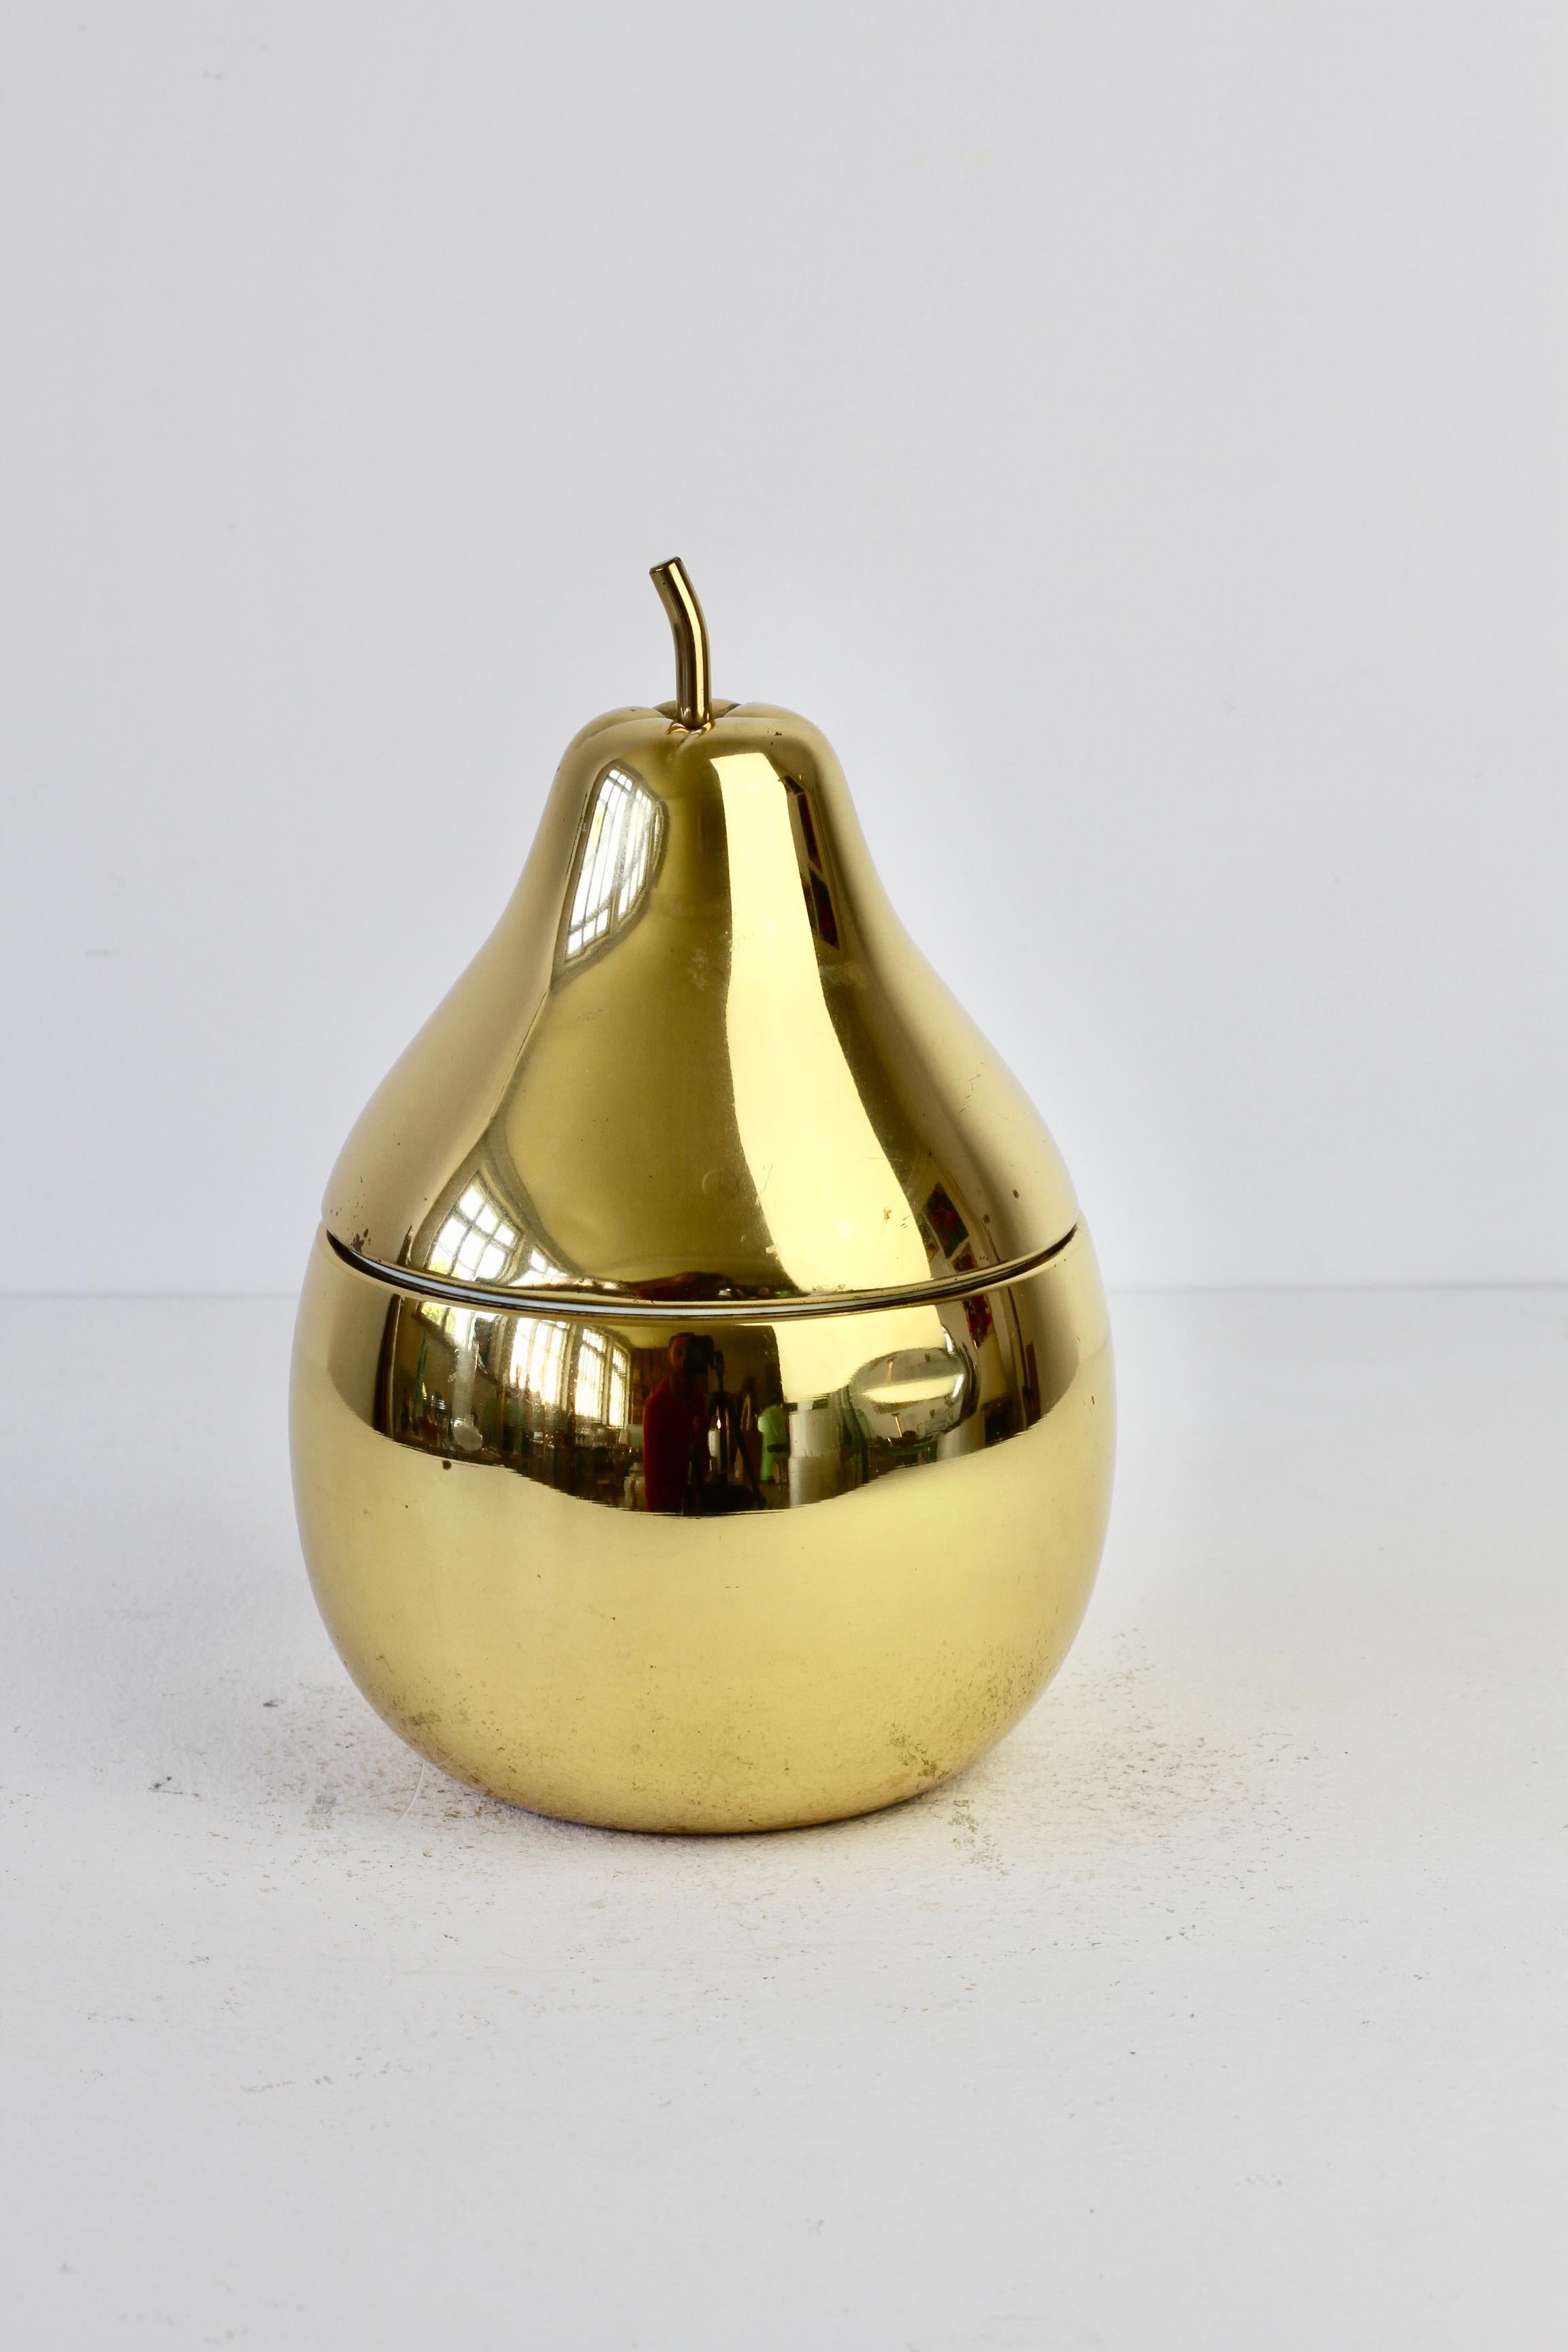 Vintage Mid-Century polished brass and. Plastic ice bucket, box or ice cube holder made circa 1970s. This piece would look fantastic displayed on a brass and chrome Romeo Rega or Maison Jansen bar cart or drinks trolley. 

In the style of Ettore